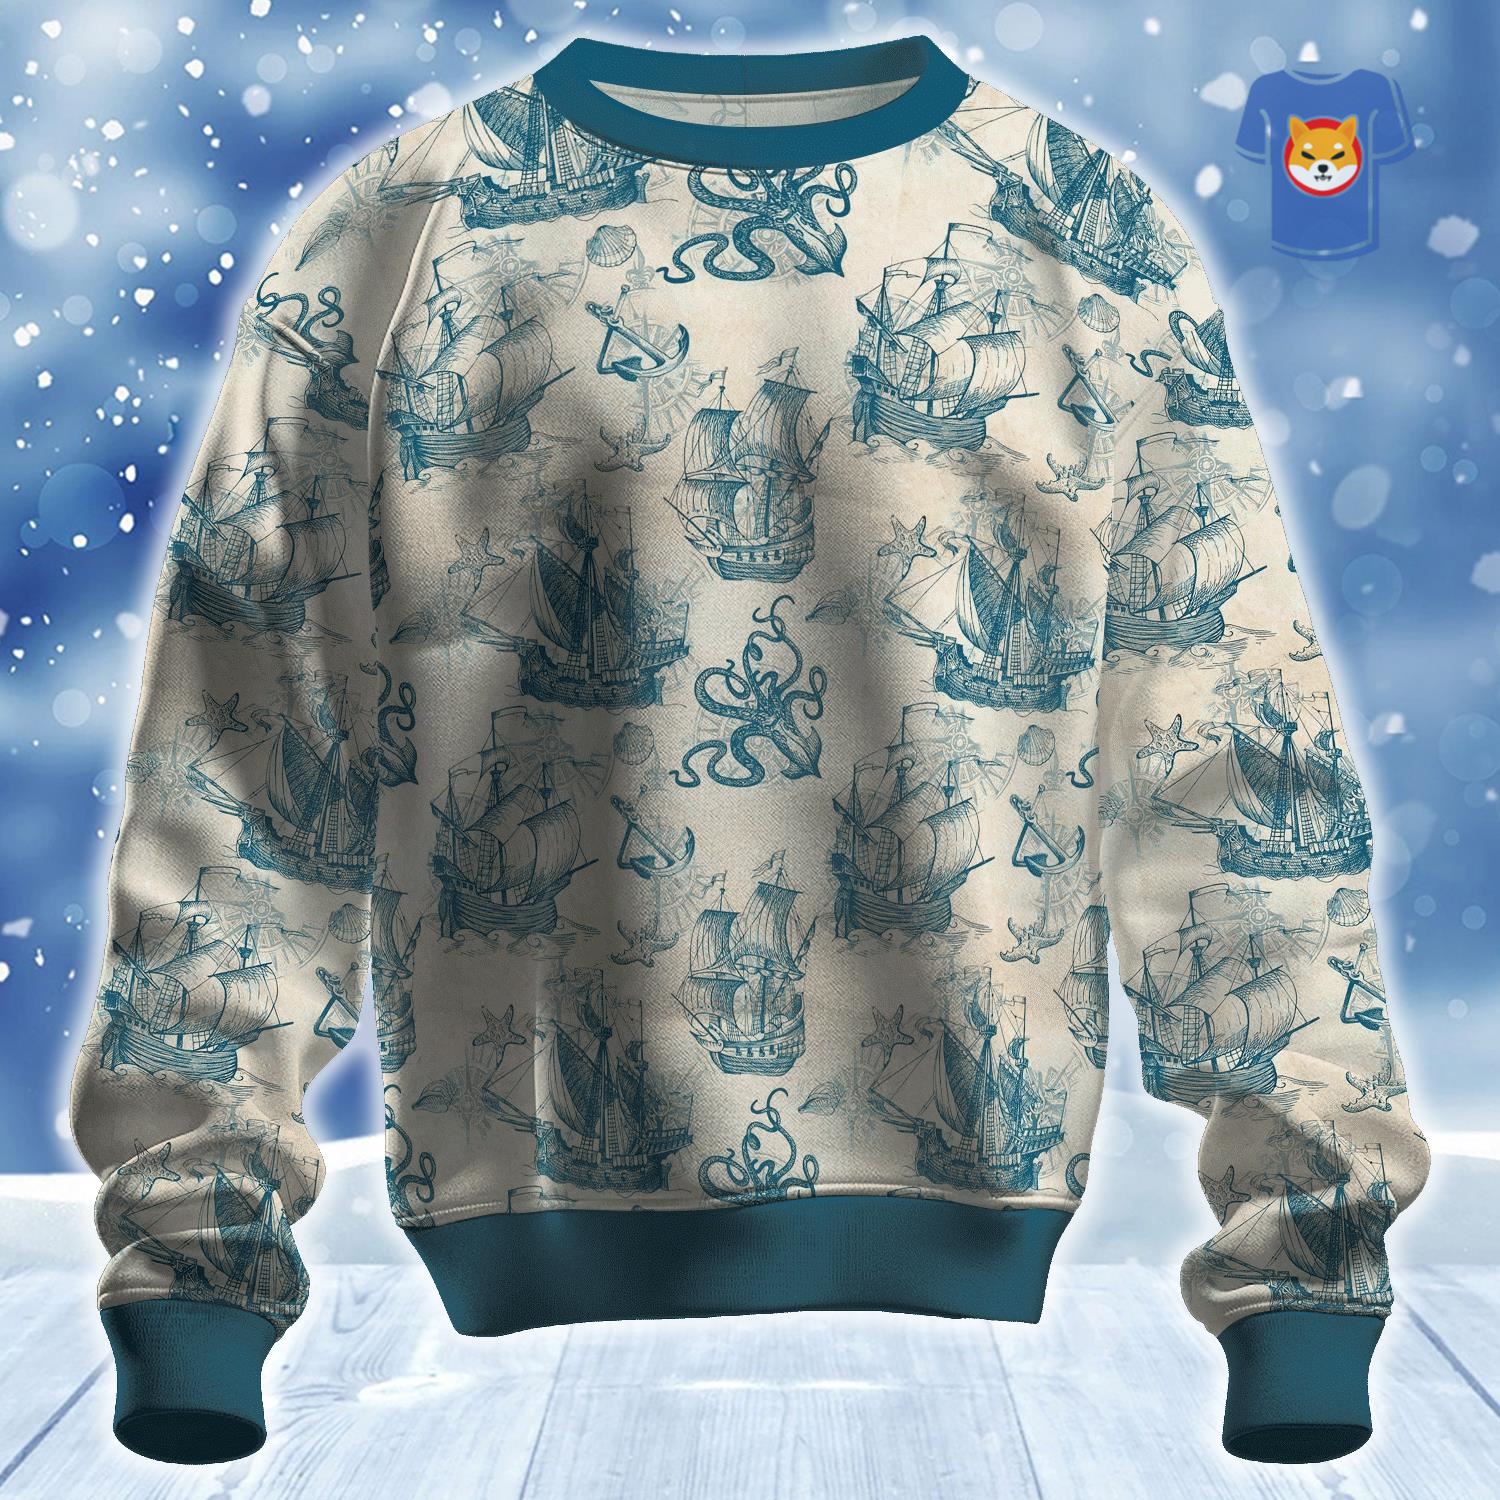 Seas The Day Ugly Christmas Sweater 